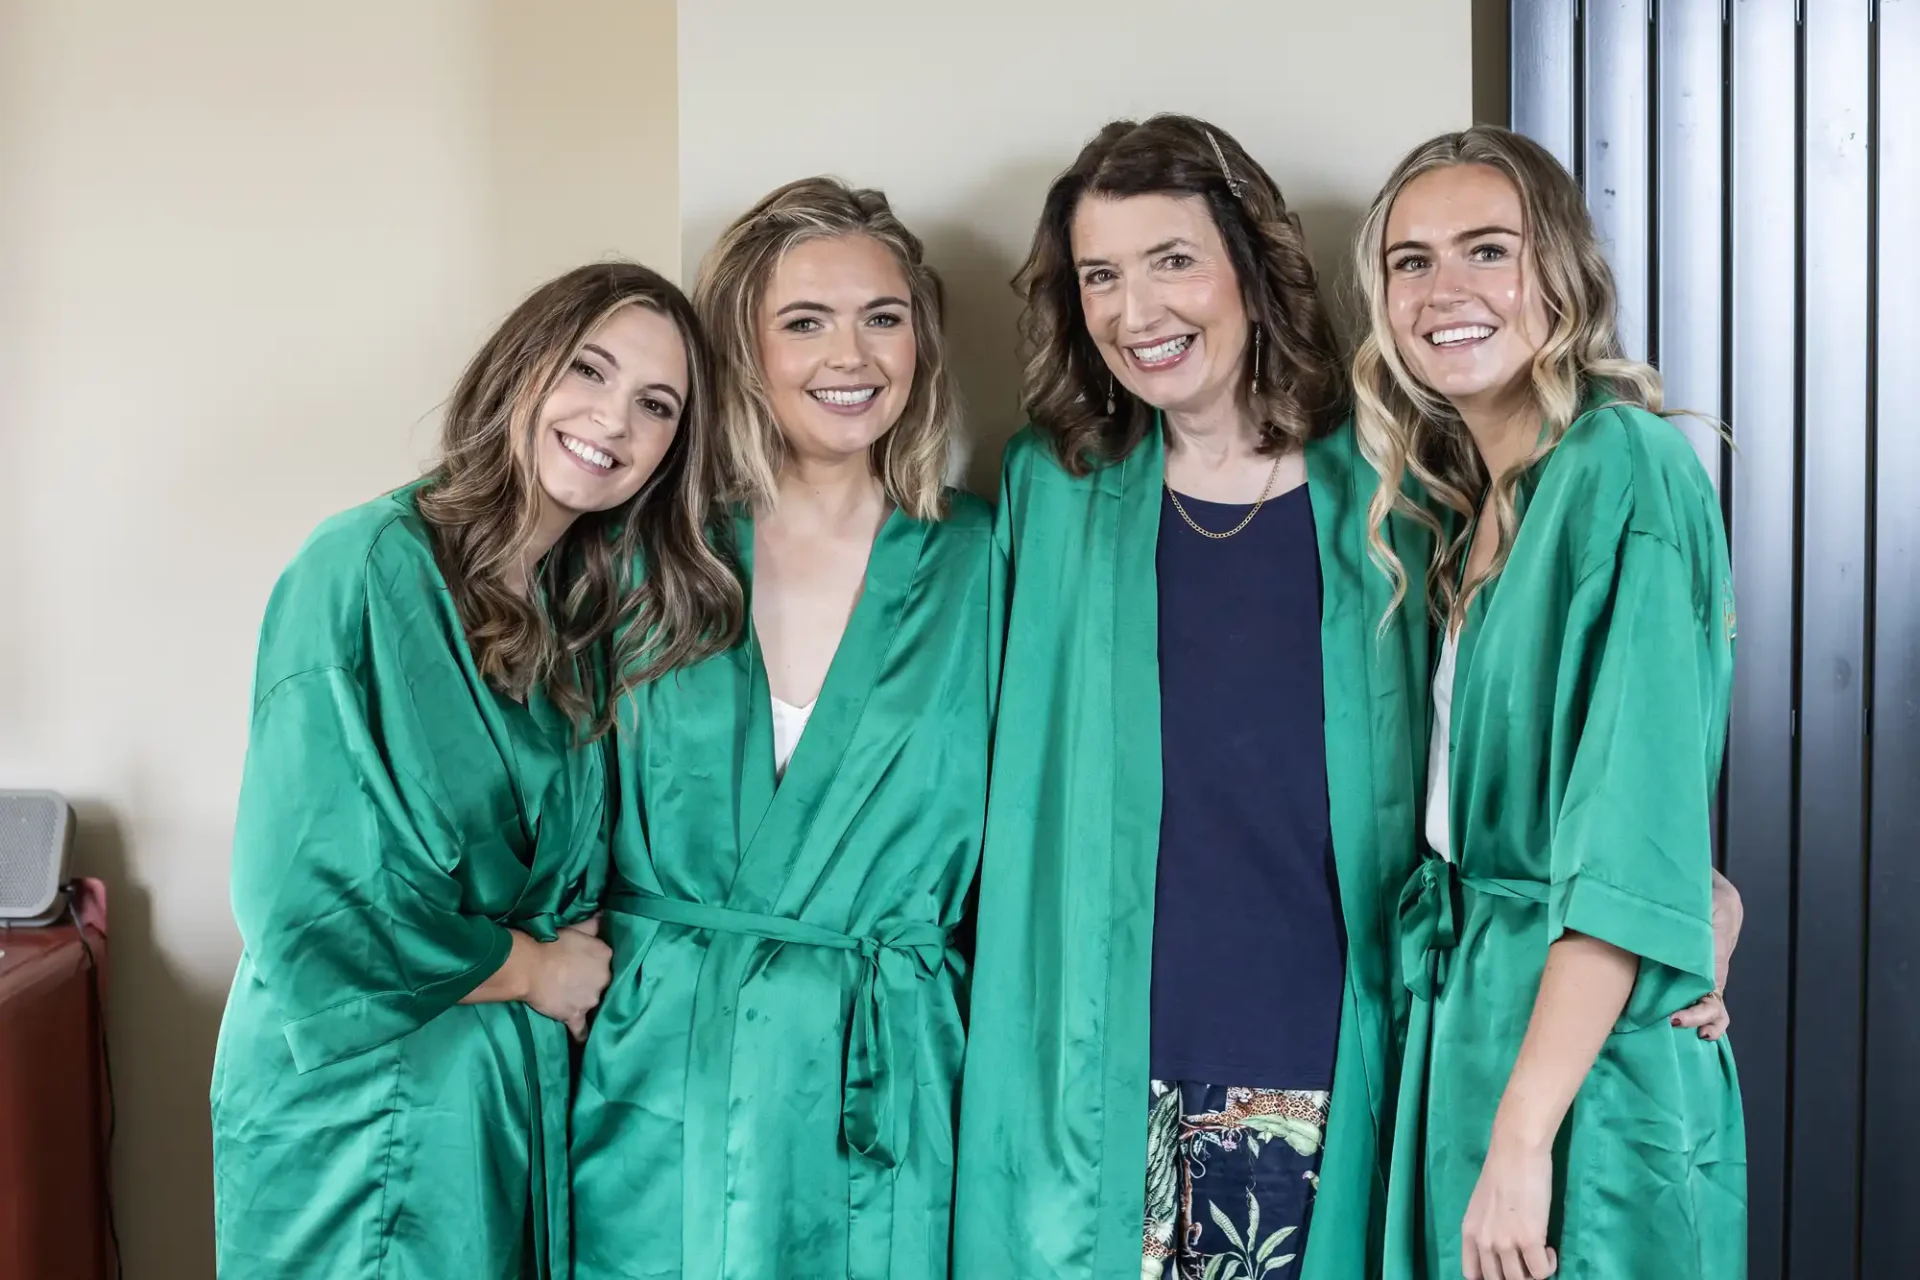 Four women wearing green robes stand close together, smiling, in an indoor setting with light-colored walls and a black vertical panel.